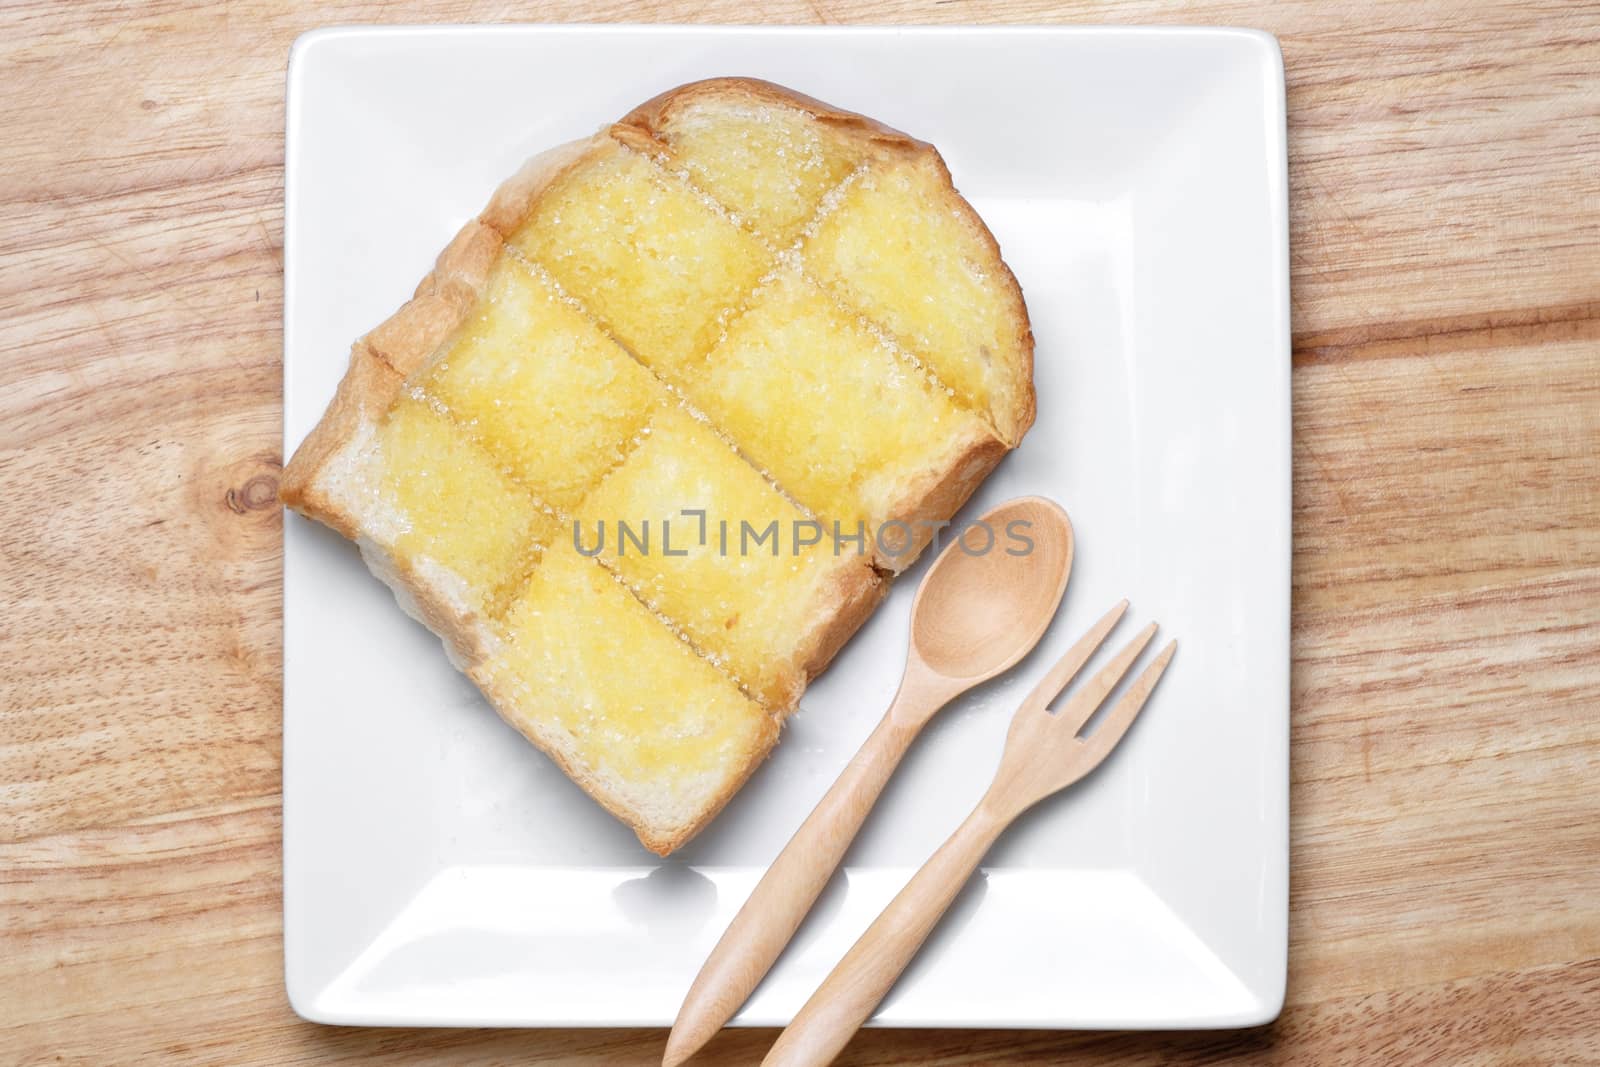 toasted bread on white ceramic dish. toasted bread topping by condensed milk and sugar. wooden spoon and fork ready to eat.